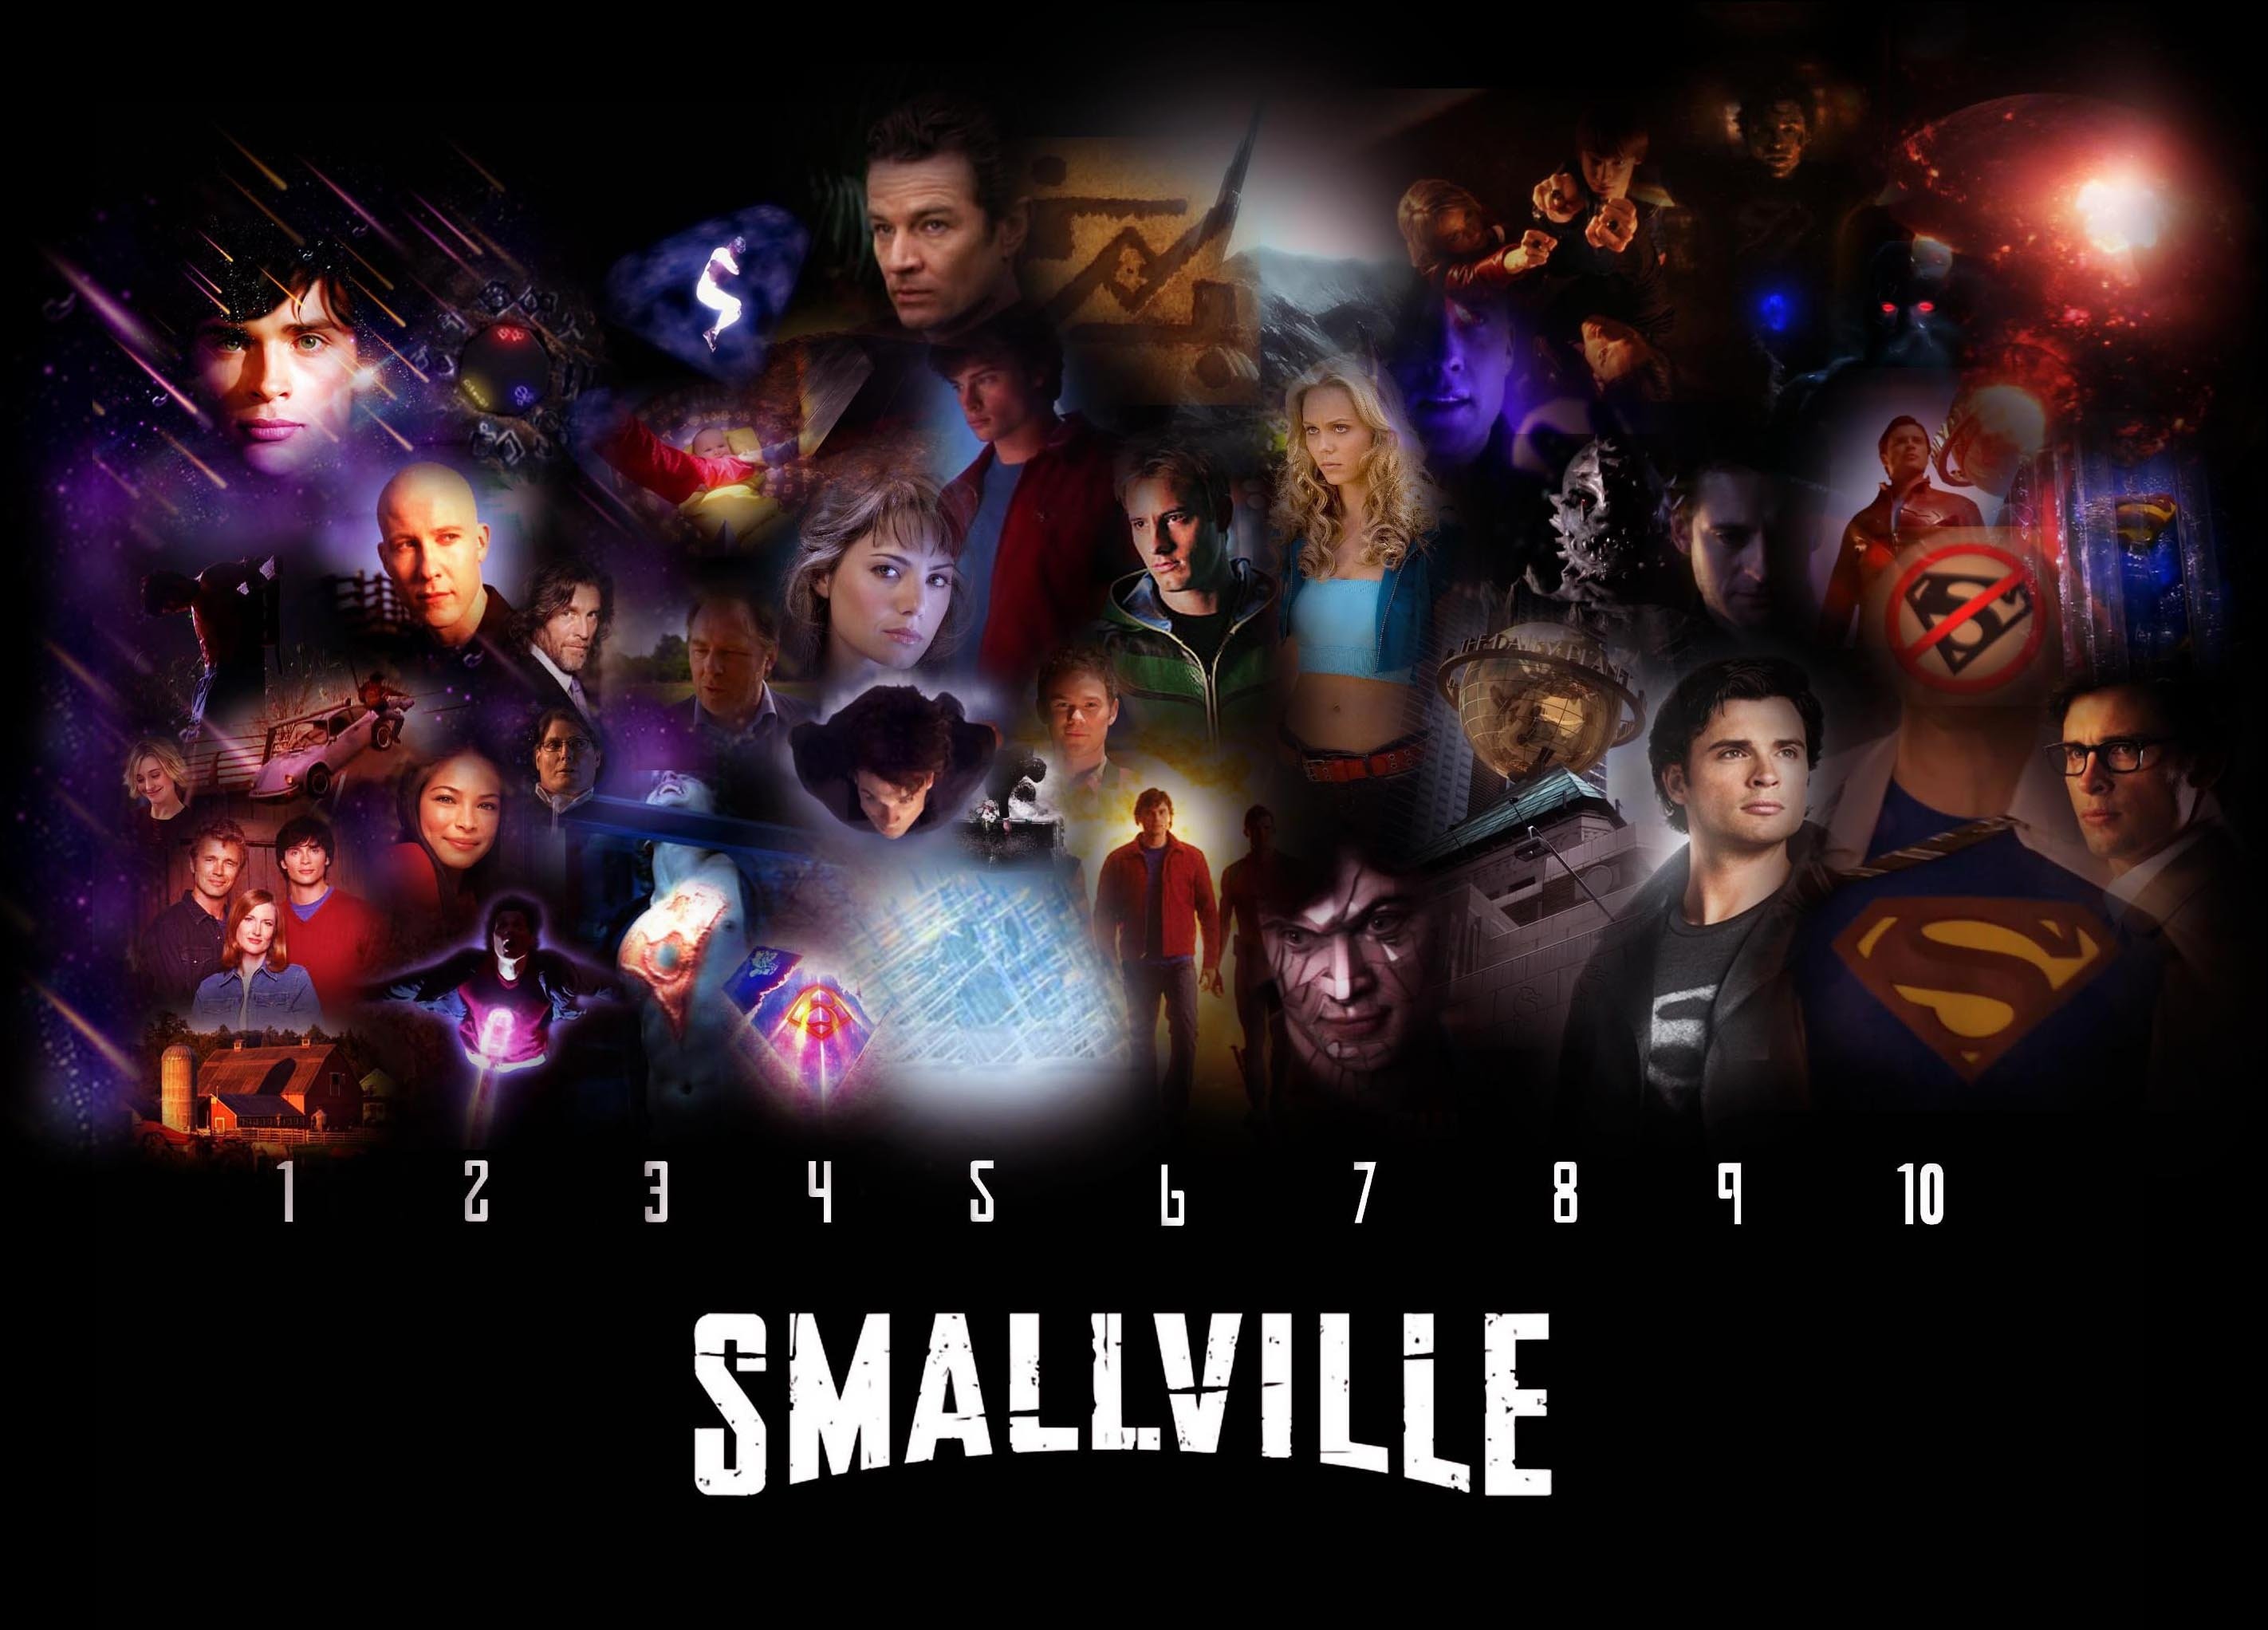 2844x2044 Pictures Of Smallville. Smallville Images, Smallville Wallpapers ...